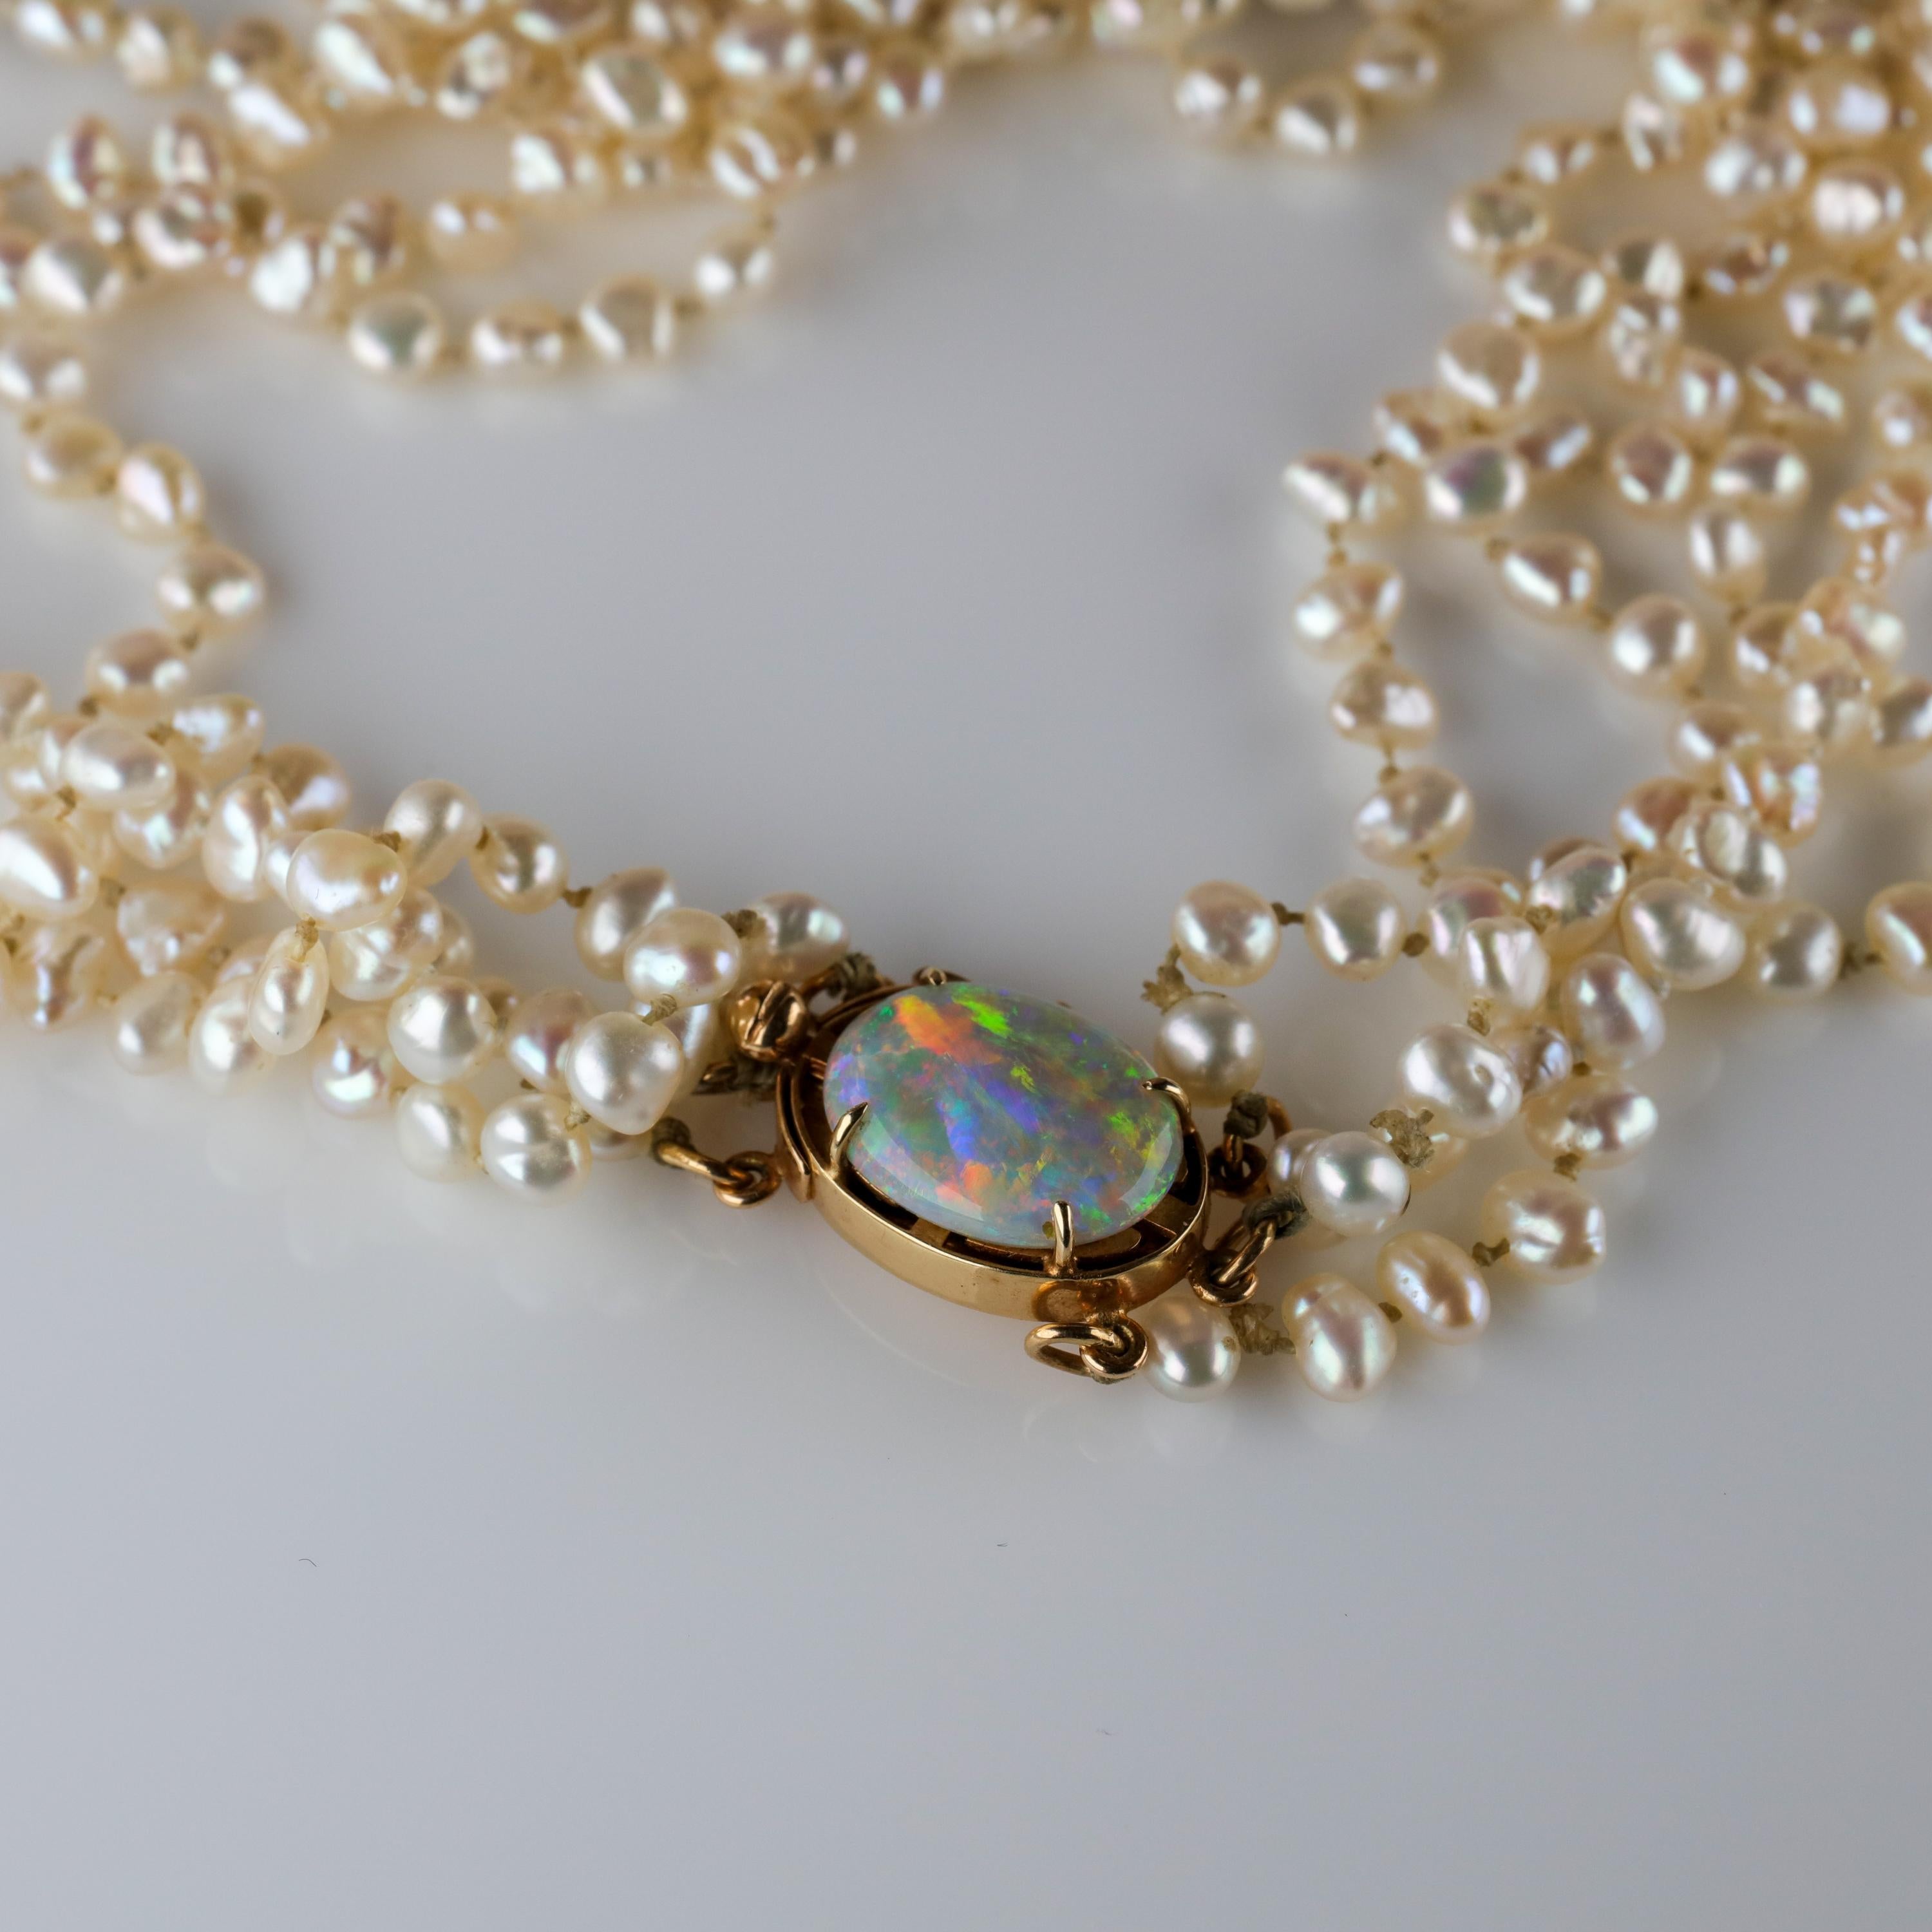 Gump's Pearl and Opal Necklace Features Rare & Authentic Biwa Pearls 6